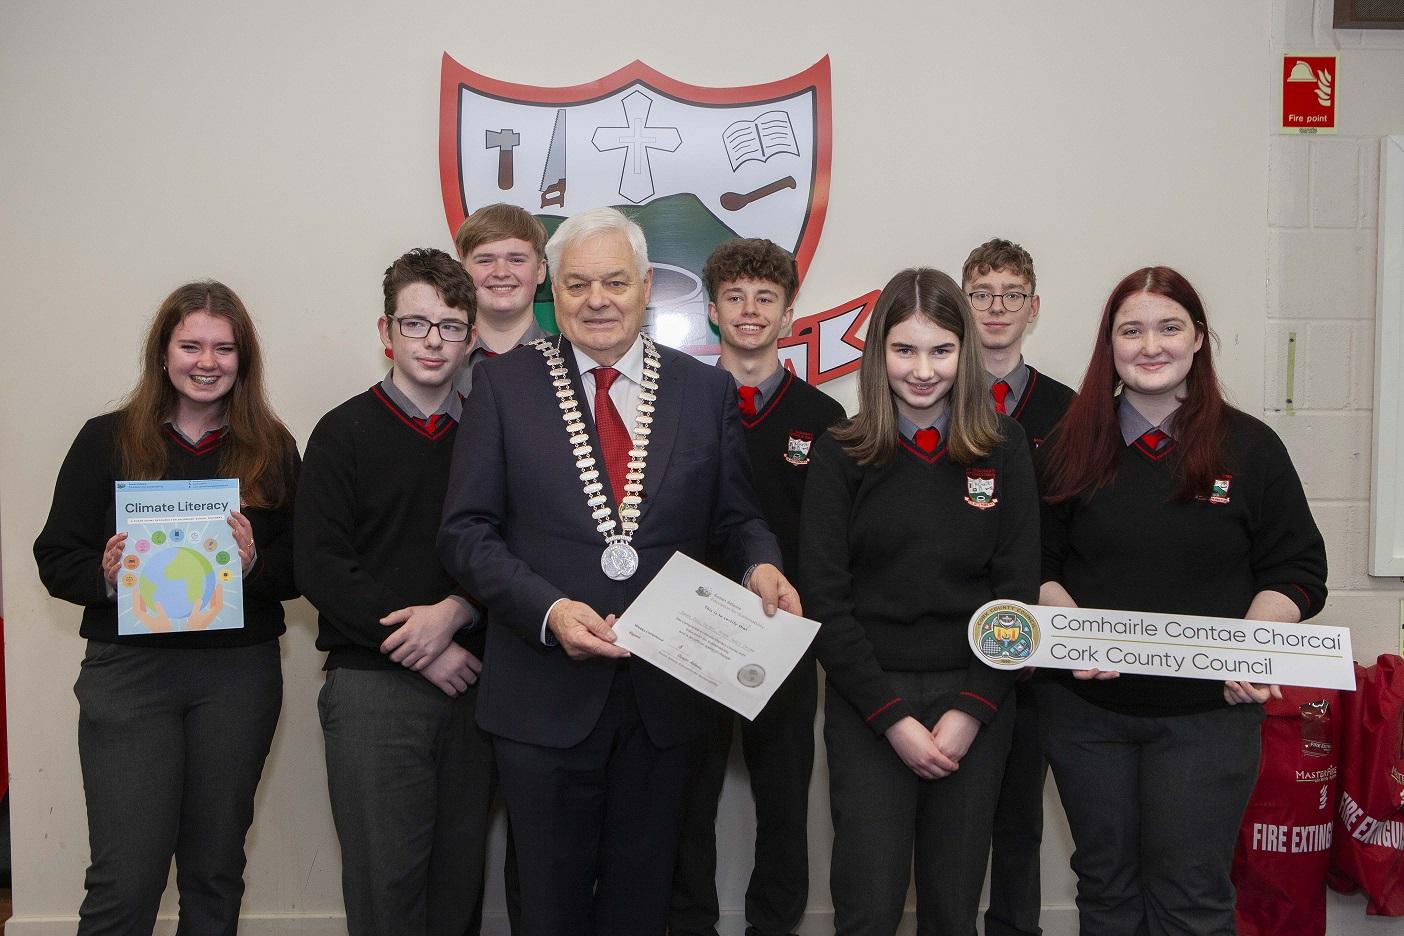 Mayor of the County of Cork, Cllr. Frank O'Flynn with students from Coláiste Fionnchua announcing our second collaboration with social enterprise, Education for Sustainability, bringing an 8-week Climate Literacy Course to eight additional schools in the county.